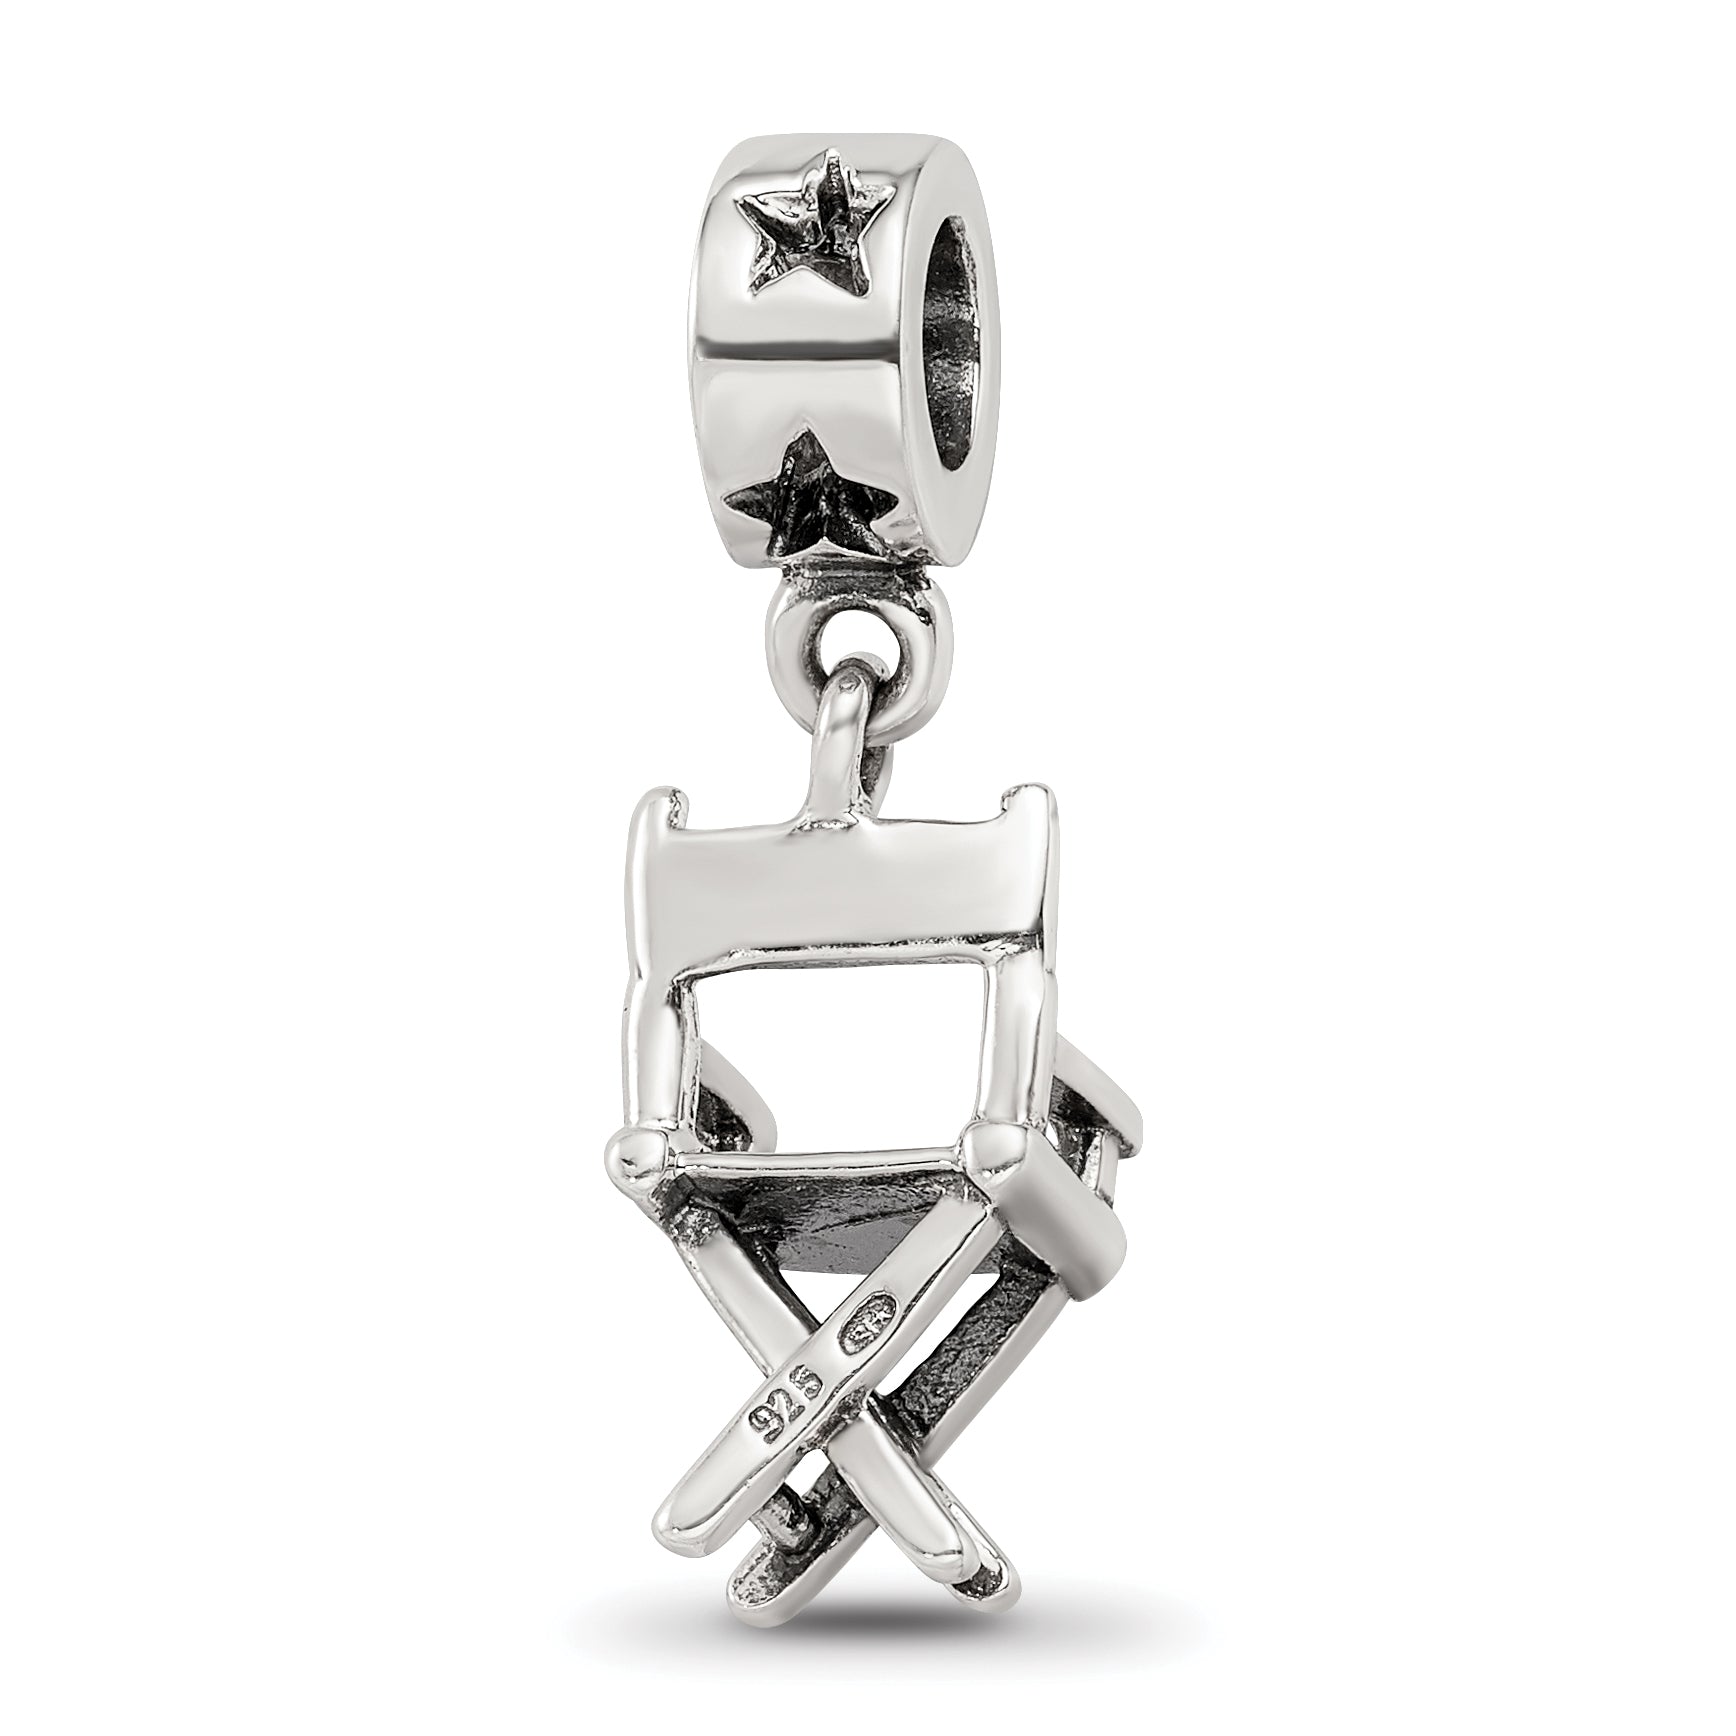 Sterling Silver Reflections Directors Chair Dangle Bead